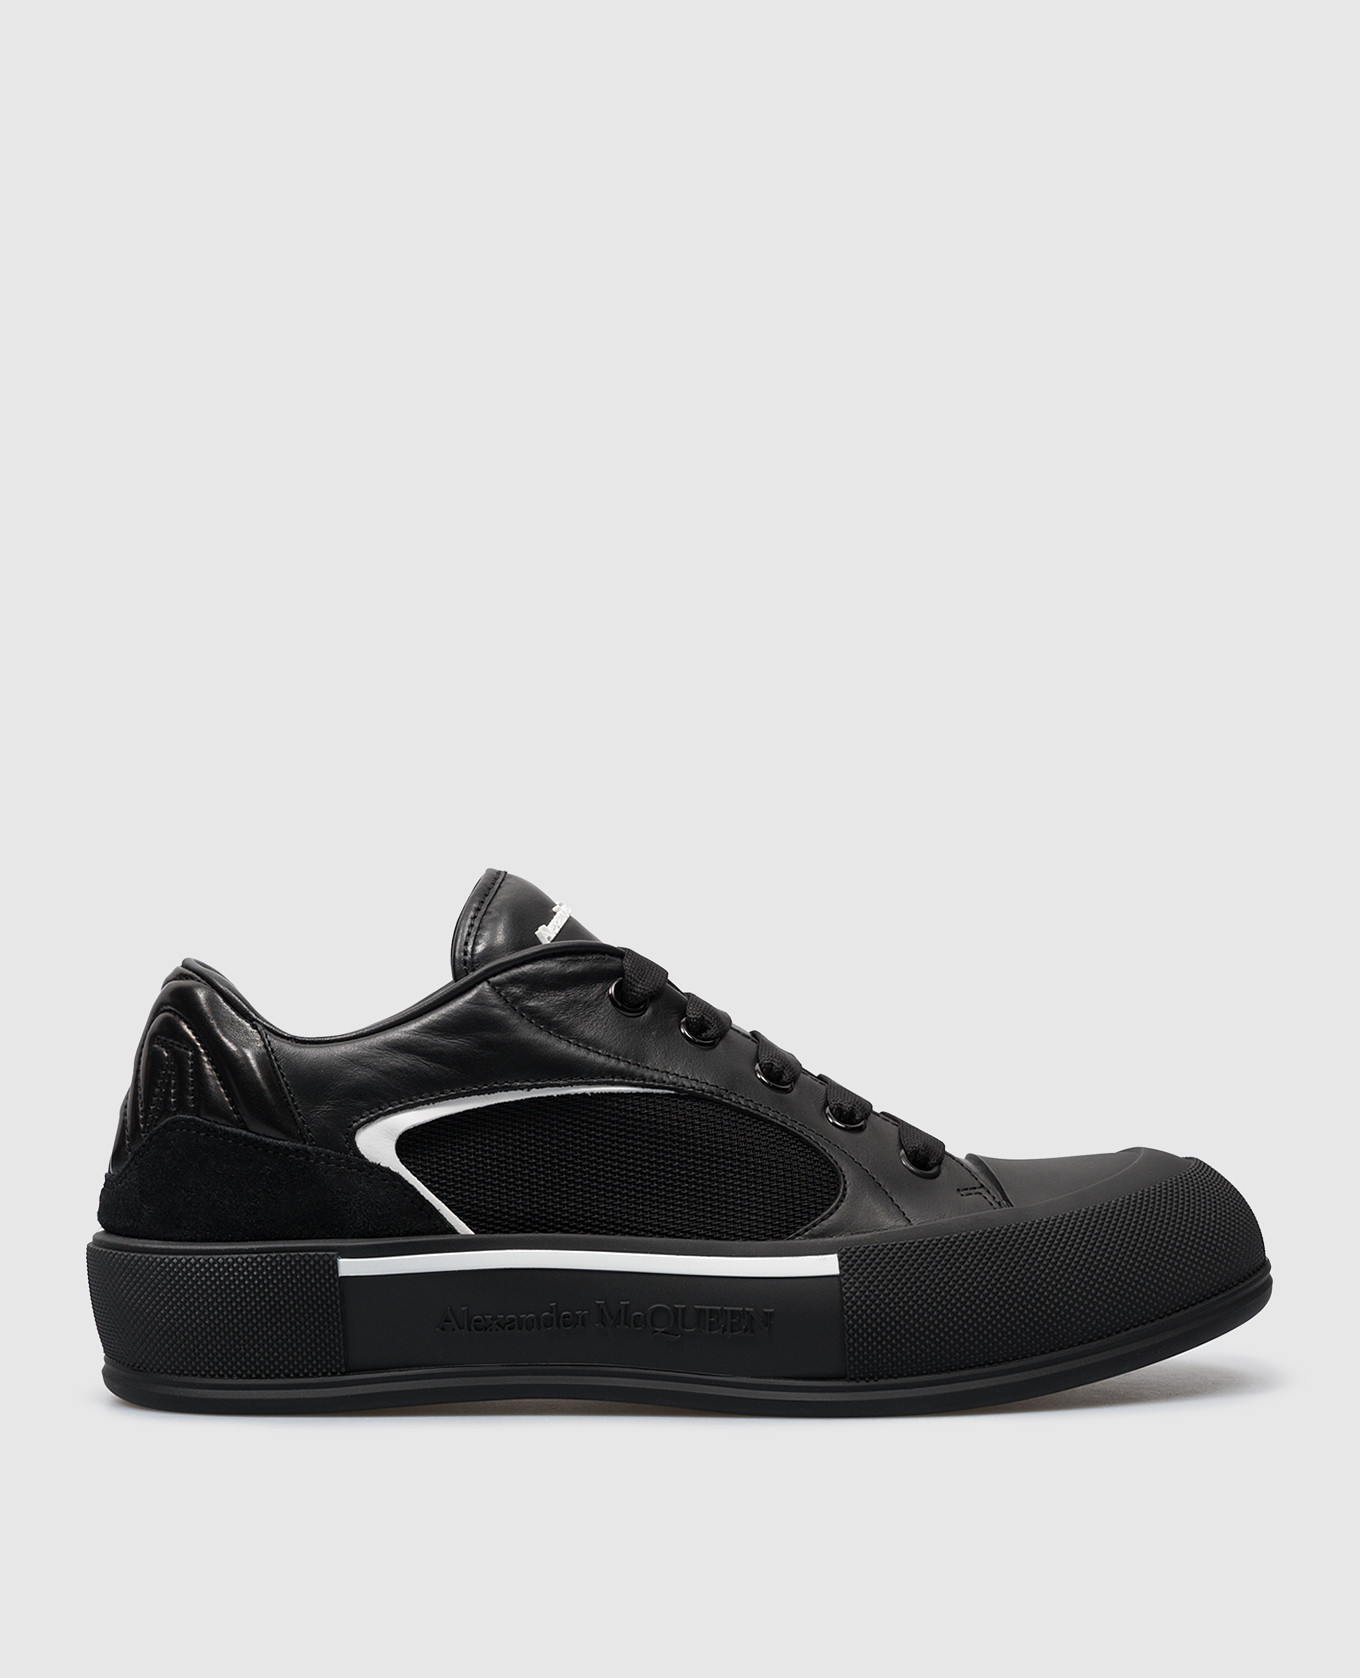 Black leather Skate Deck sneakers with logo